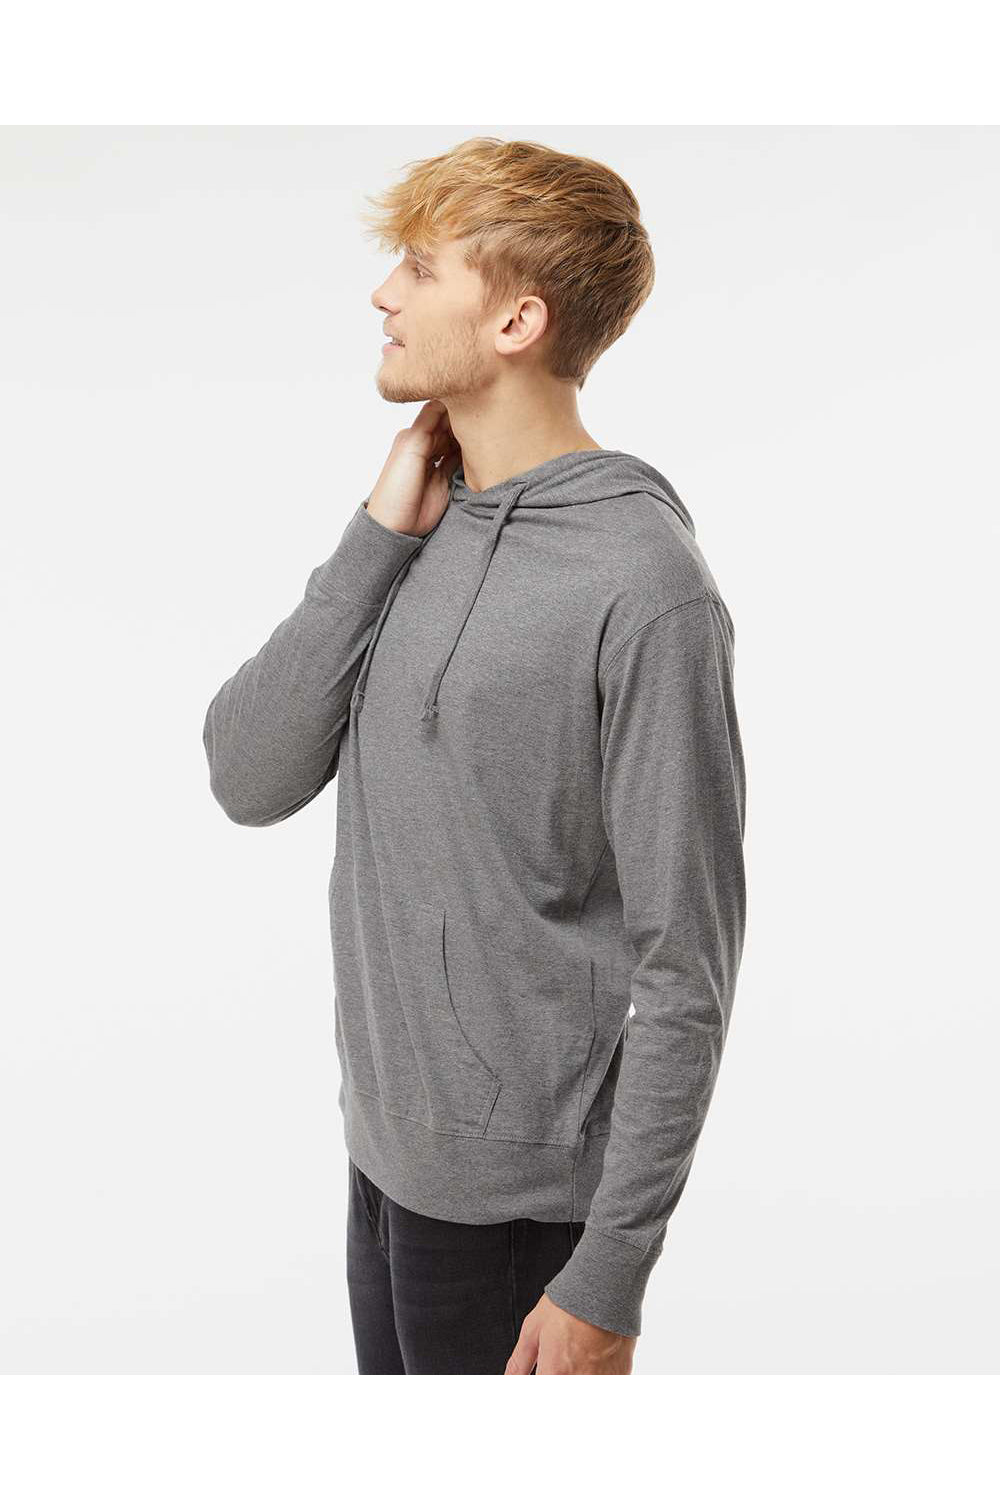 Independent Trading Co. SS150J Mens Long Sleeve Hooded T-Shirt Hoodie Heather Gunmetal Grey Model Side